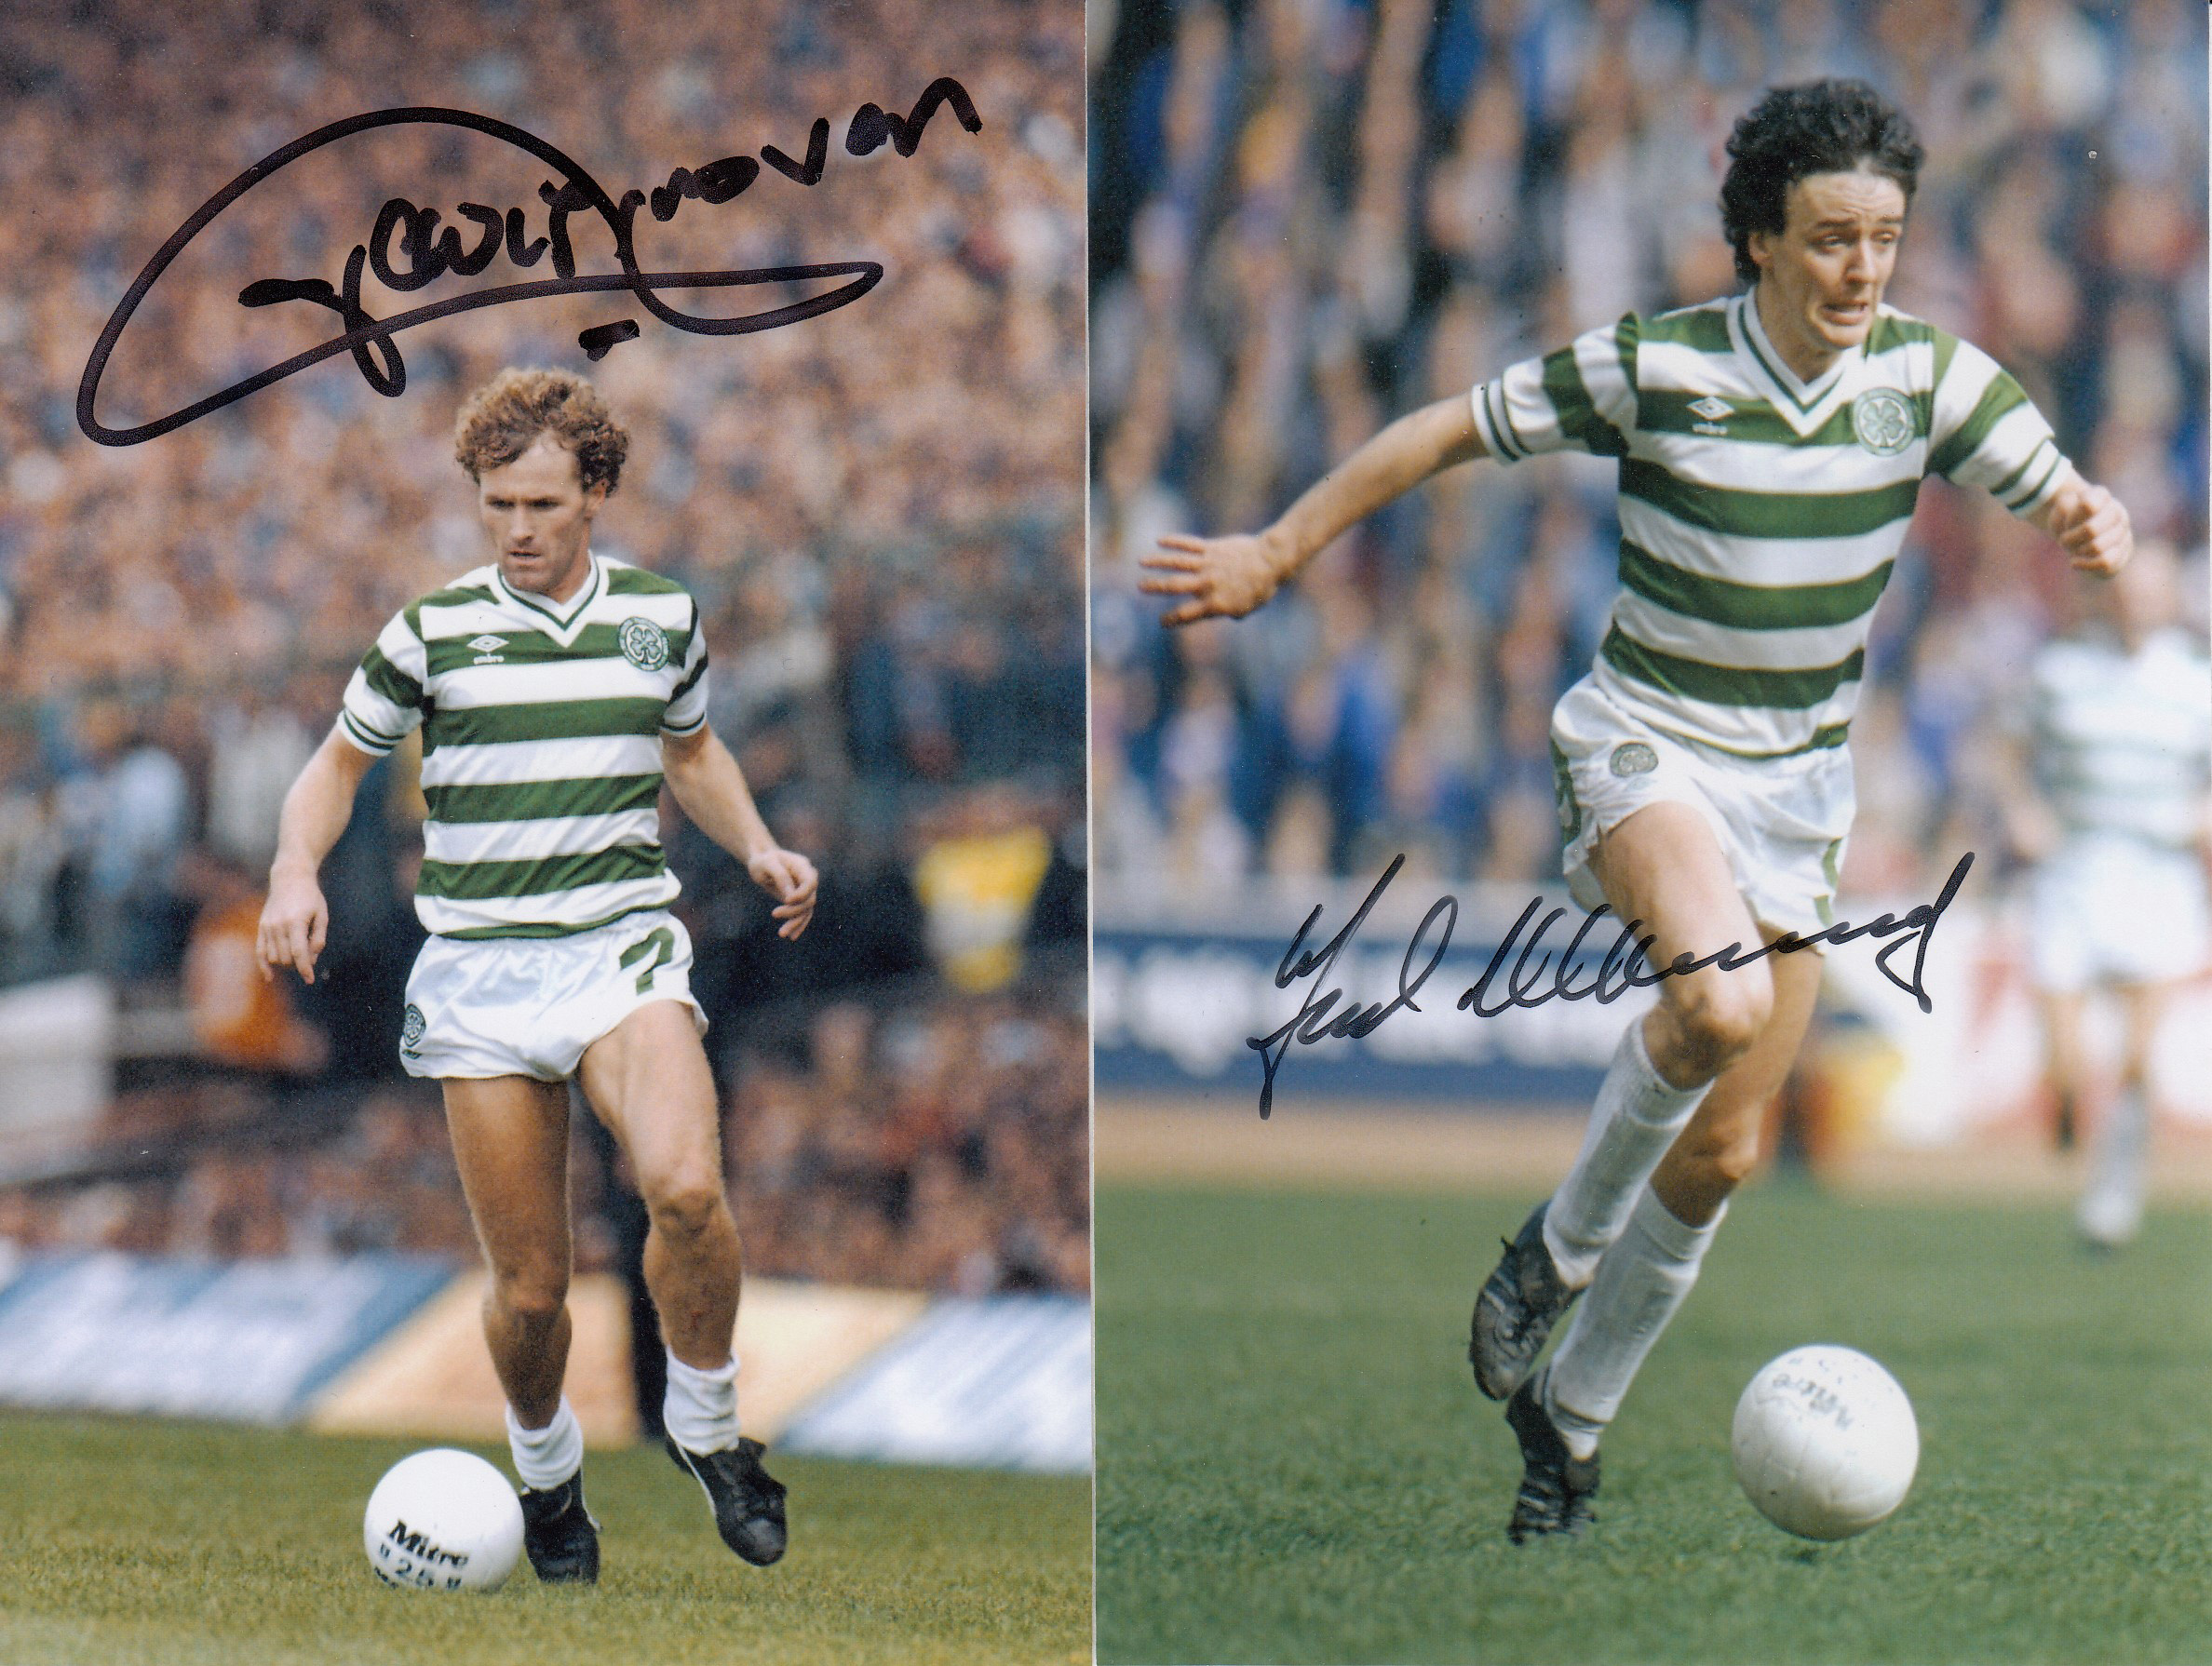 CELTIC 1980s: Autographed 6 x 4 photos, depicting Celtic centre-forward FRANK McGARVEY in full